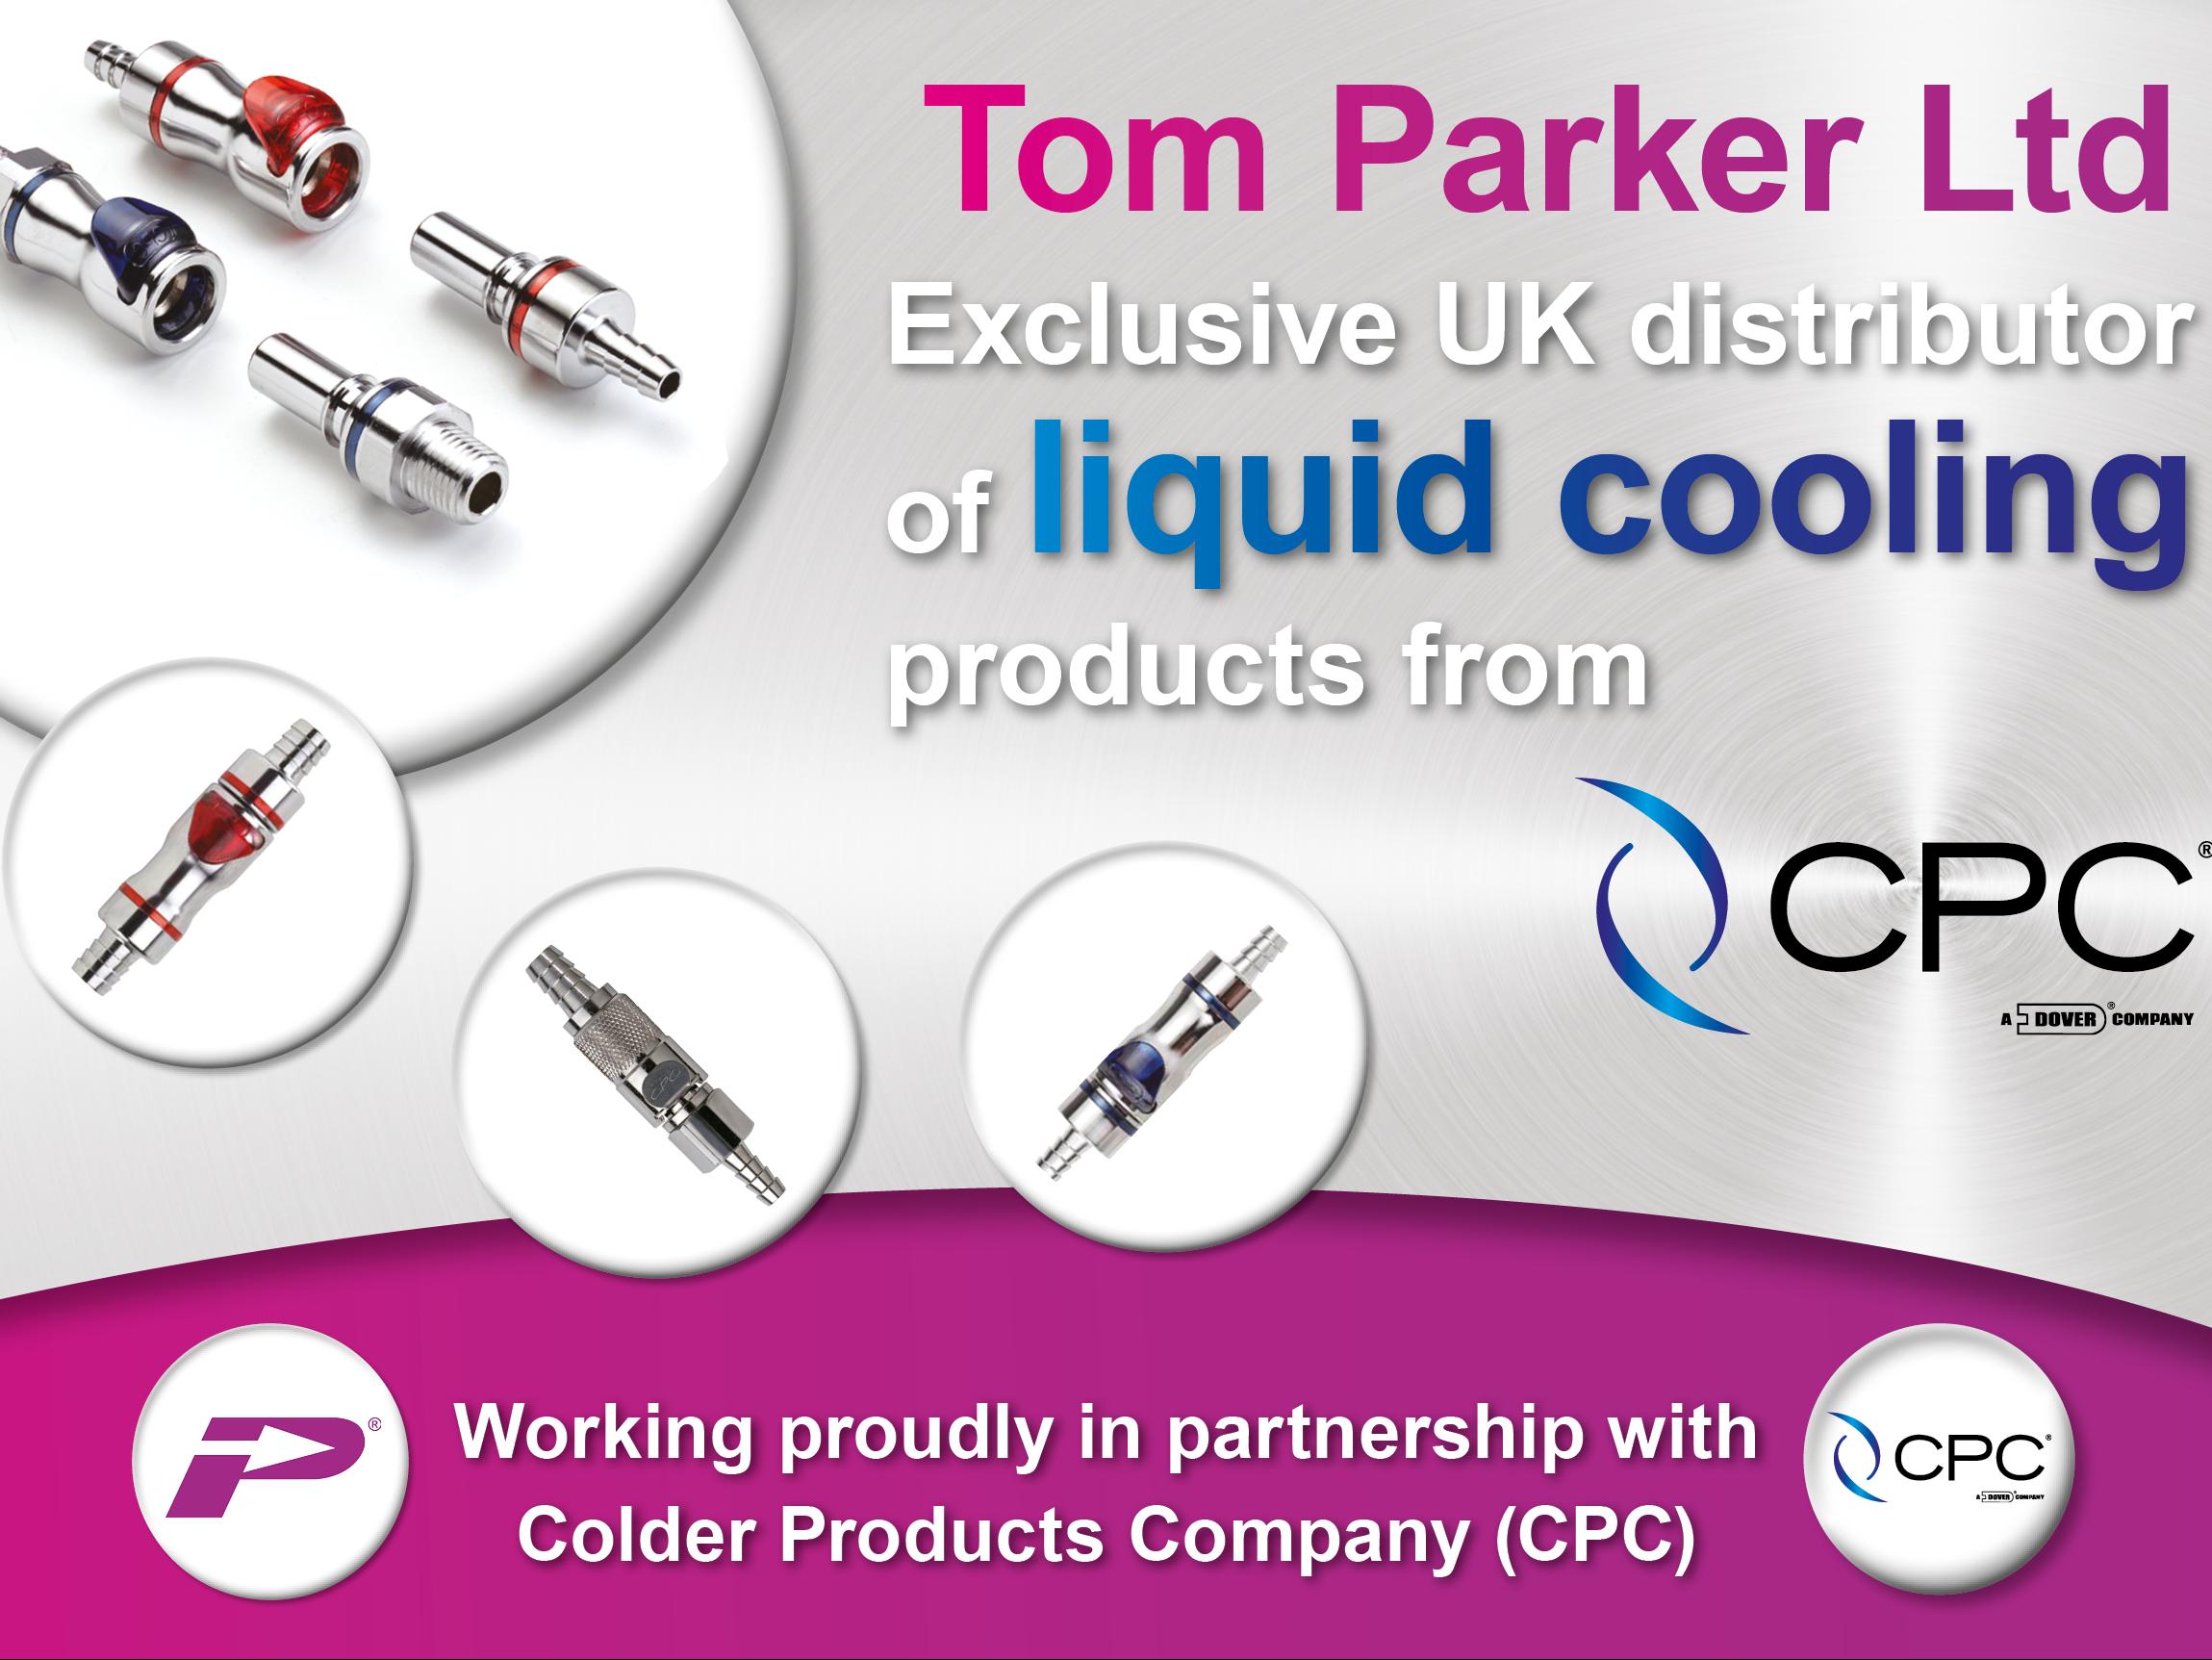 Tom Parker takes the cool approach with CPC

